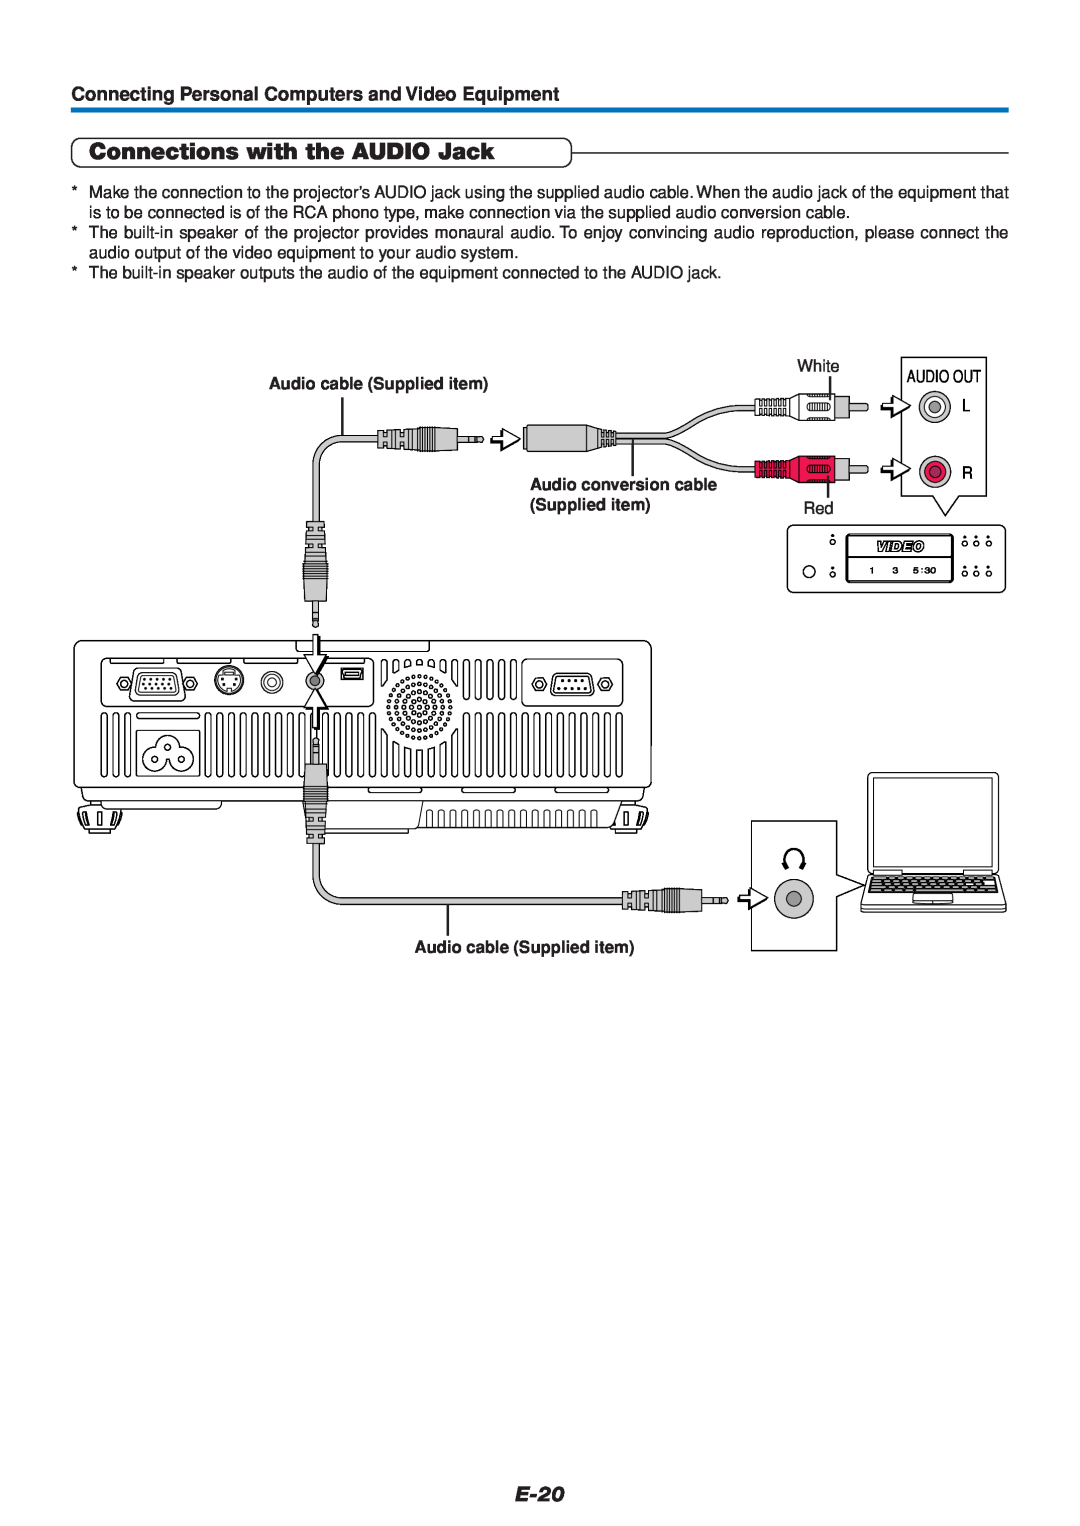 Mitsubishi Electronics DATA PROJECTOR user manual Connections with the AUDIO Jack, E-20, Audio cable Supplied item 